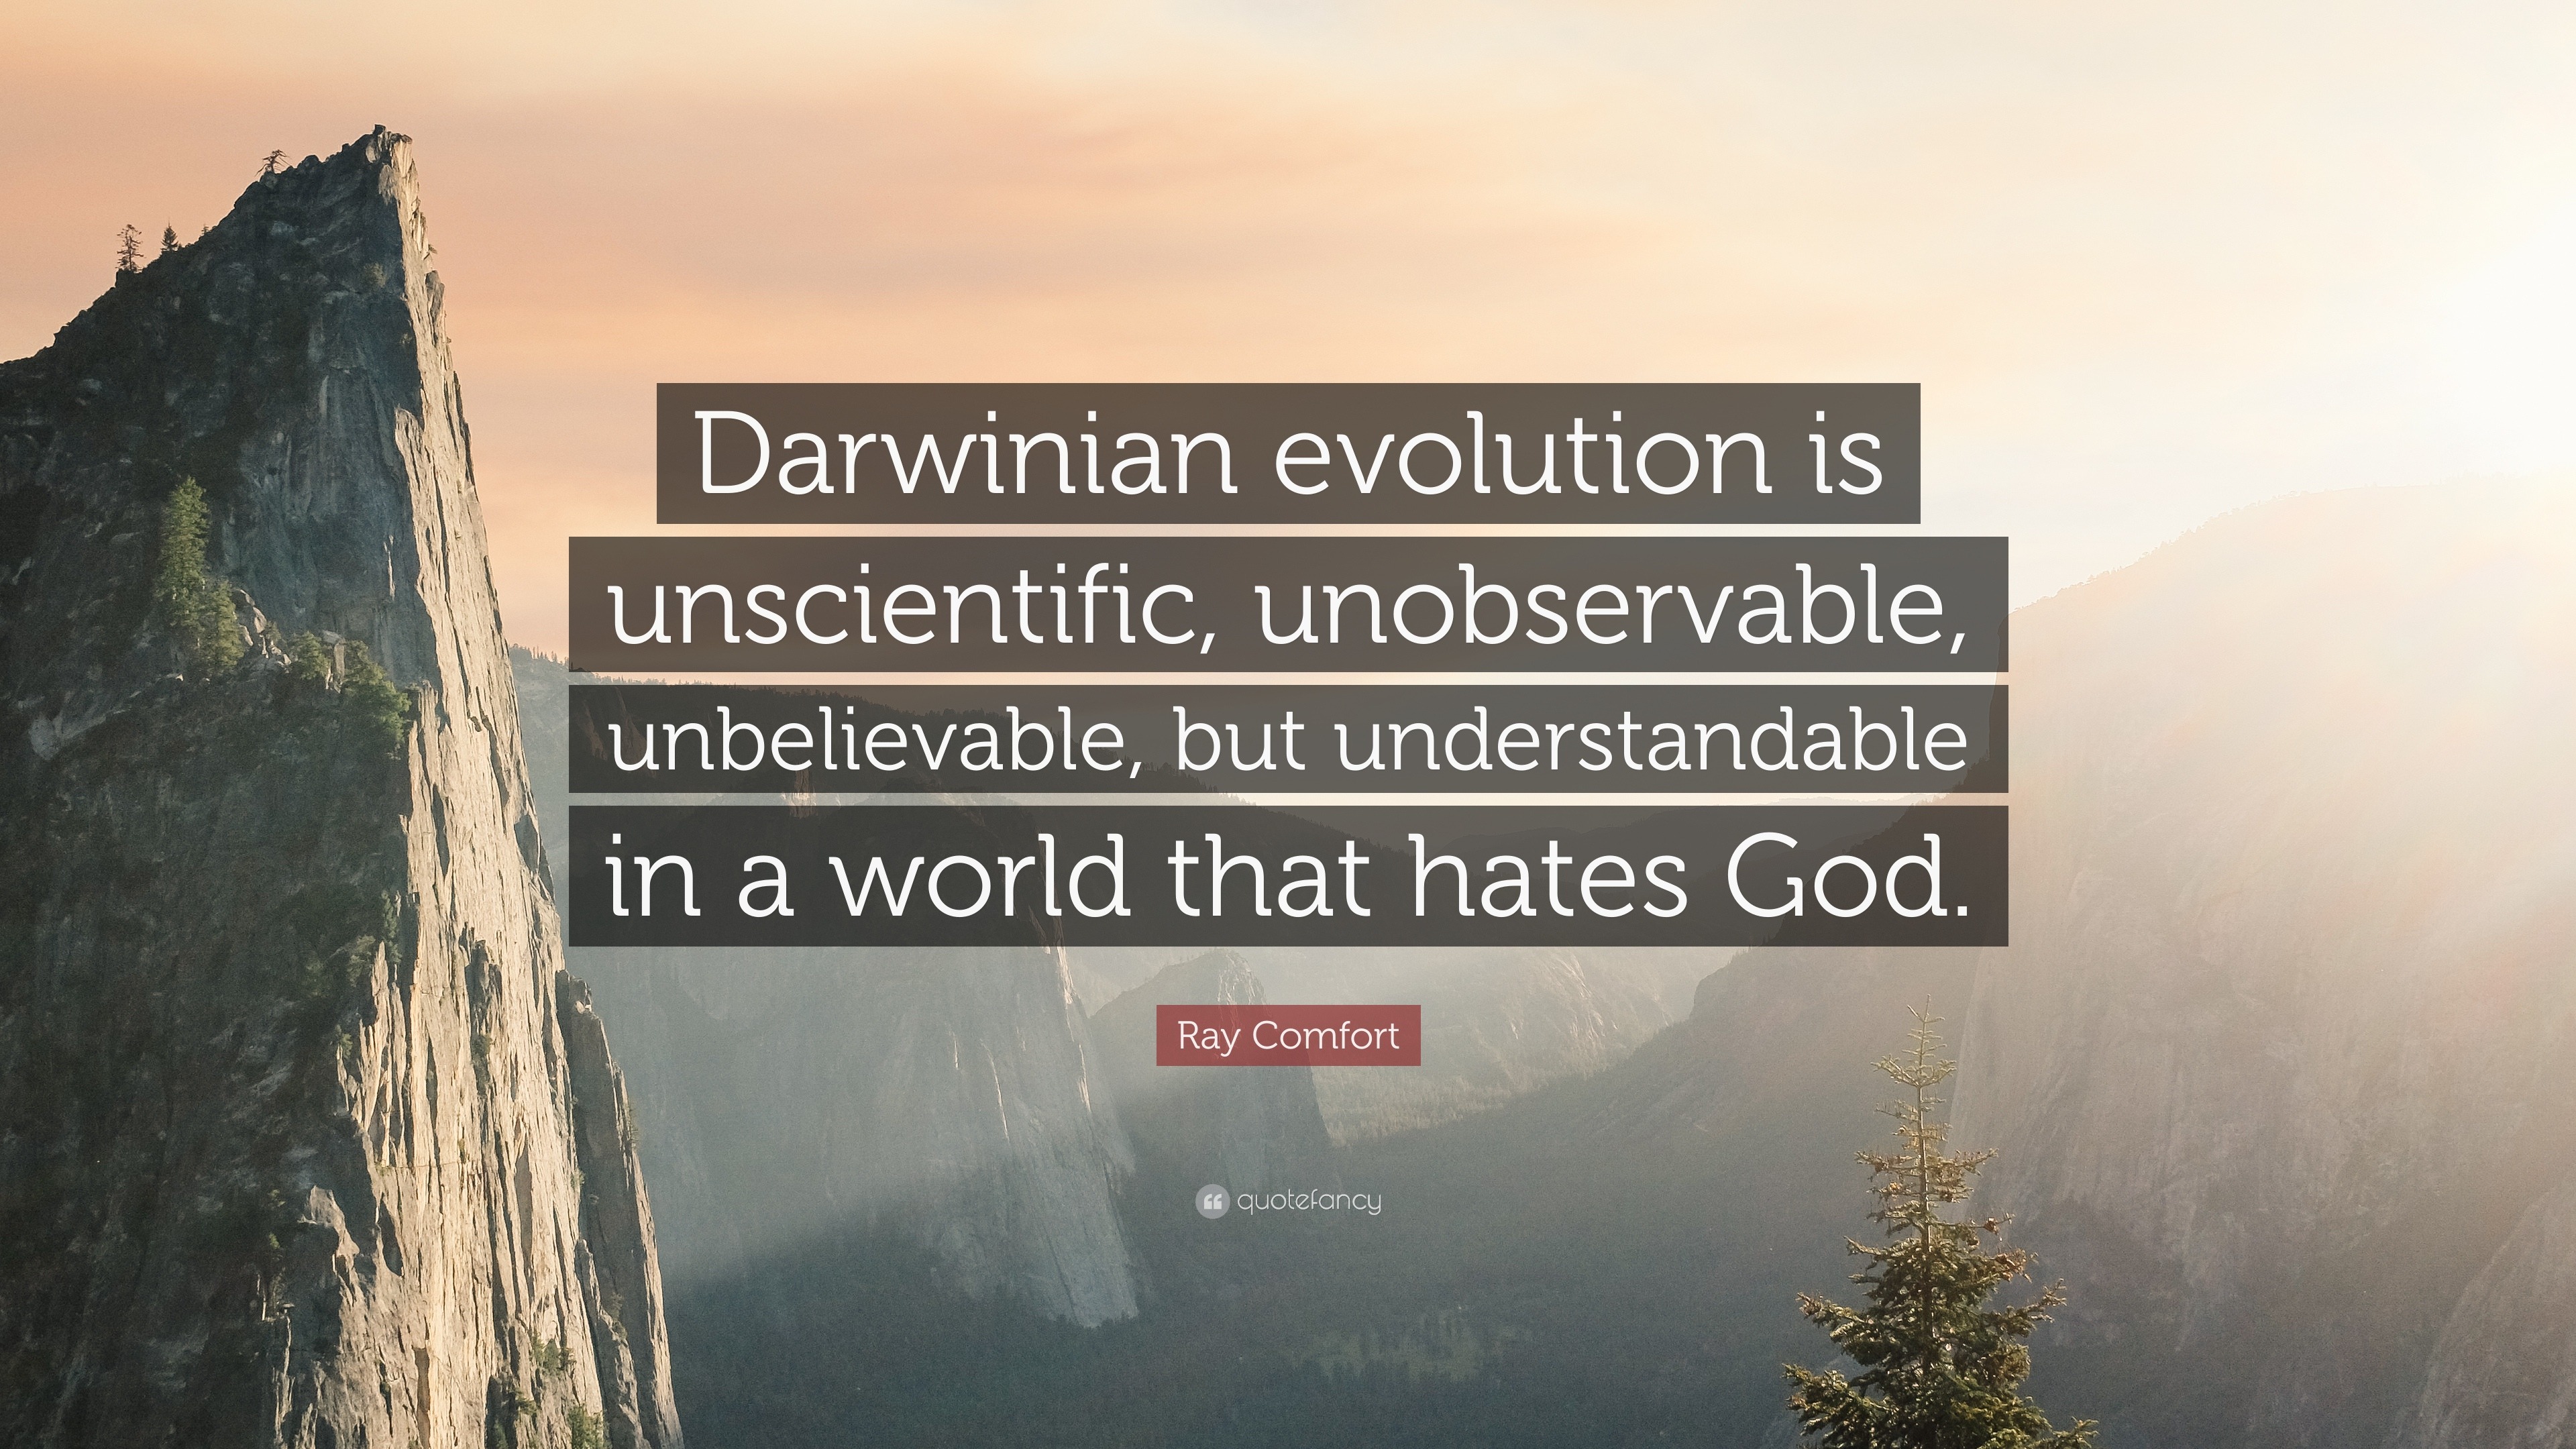 Ray Comfort Quote: “Darwinian evolution is unscientific, unobservable,  unbelievable, but understandable in a world that hates